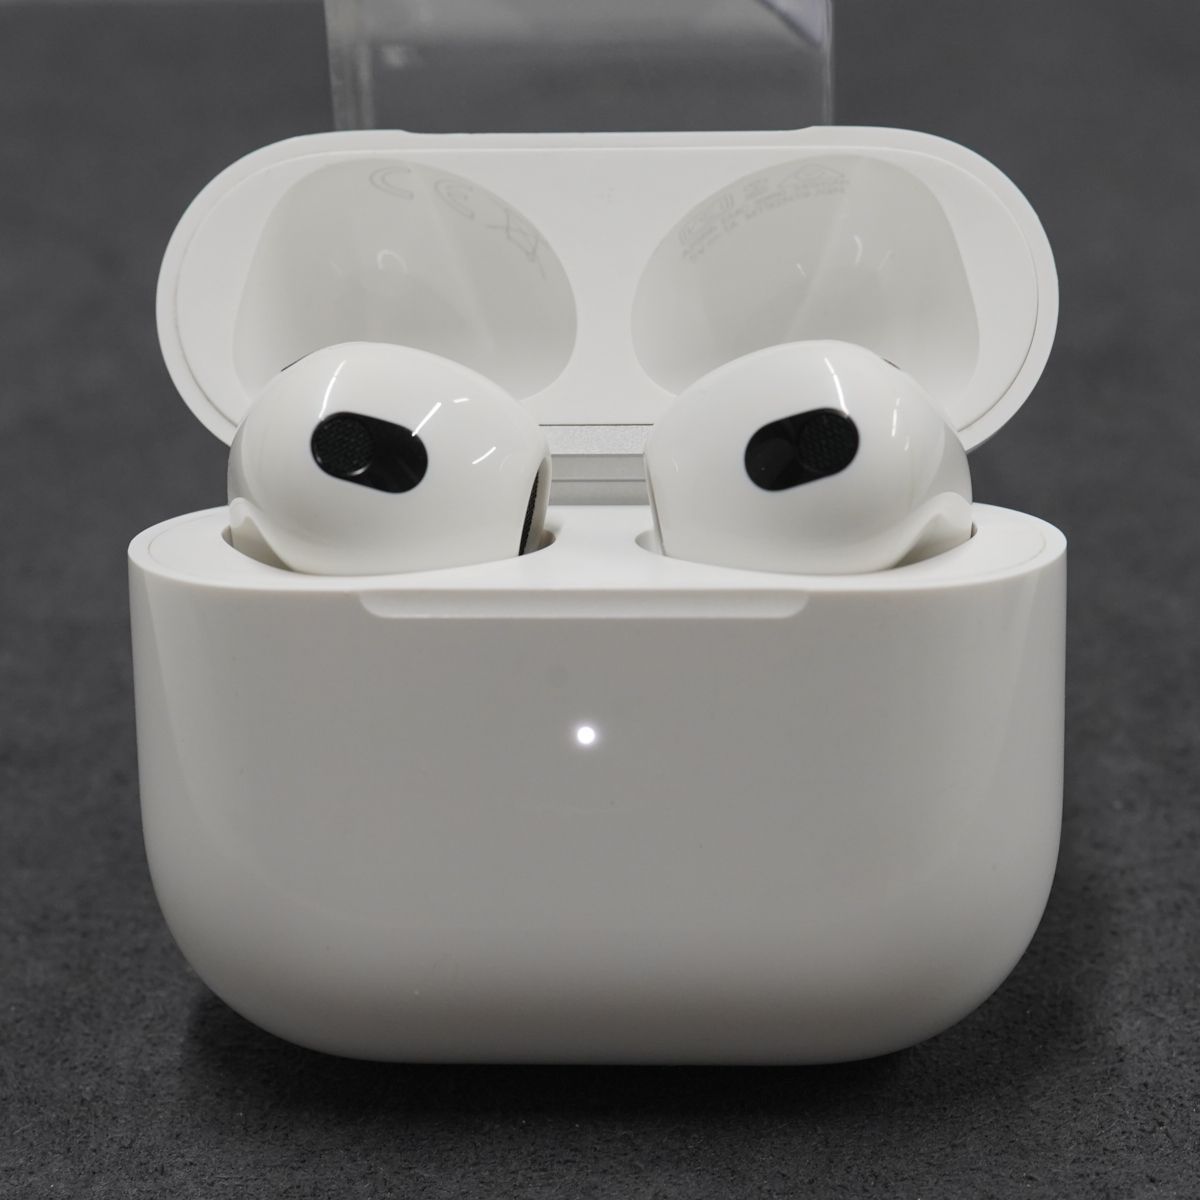 APPLE MME73J A WHITE Air Pods エアーポッズ